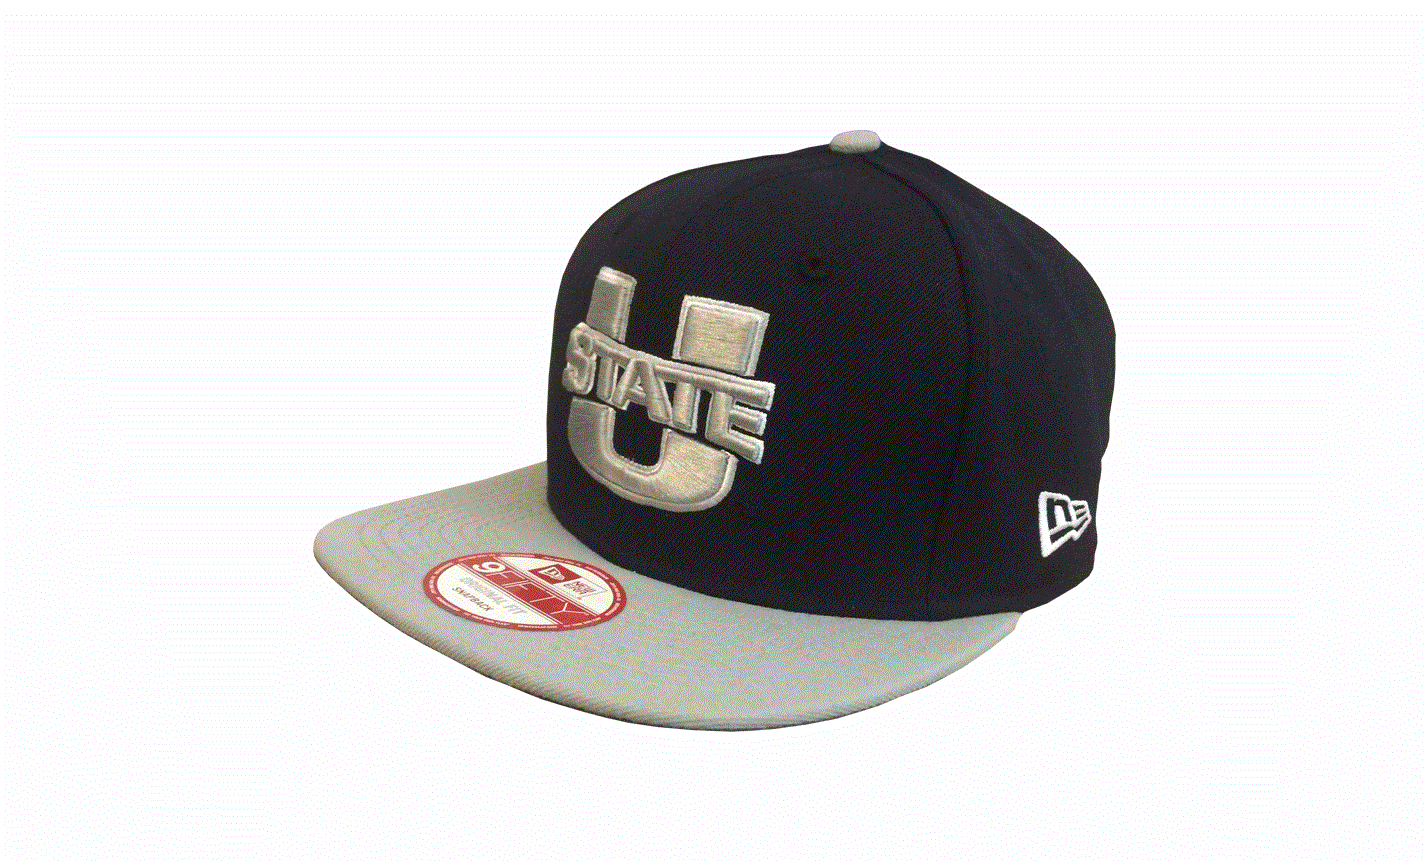 Aggie Typhoon Snap Back Hat